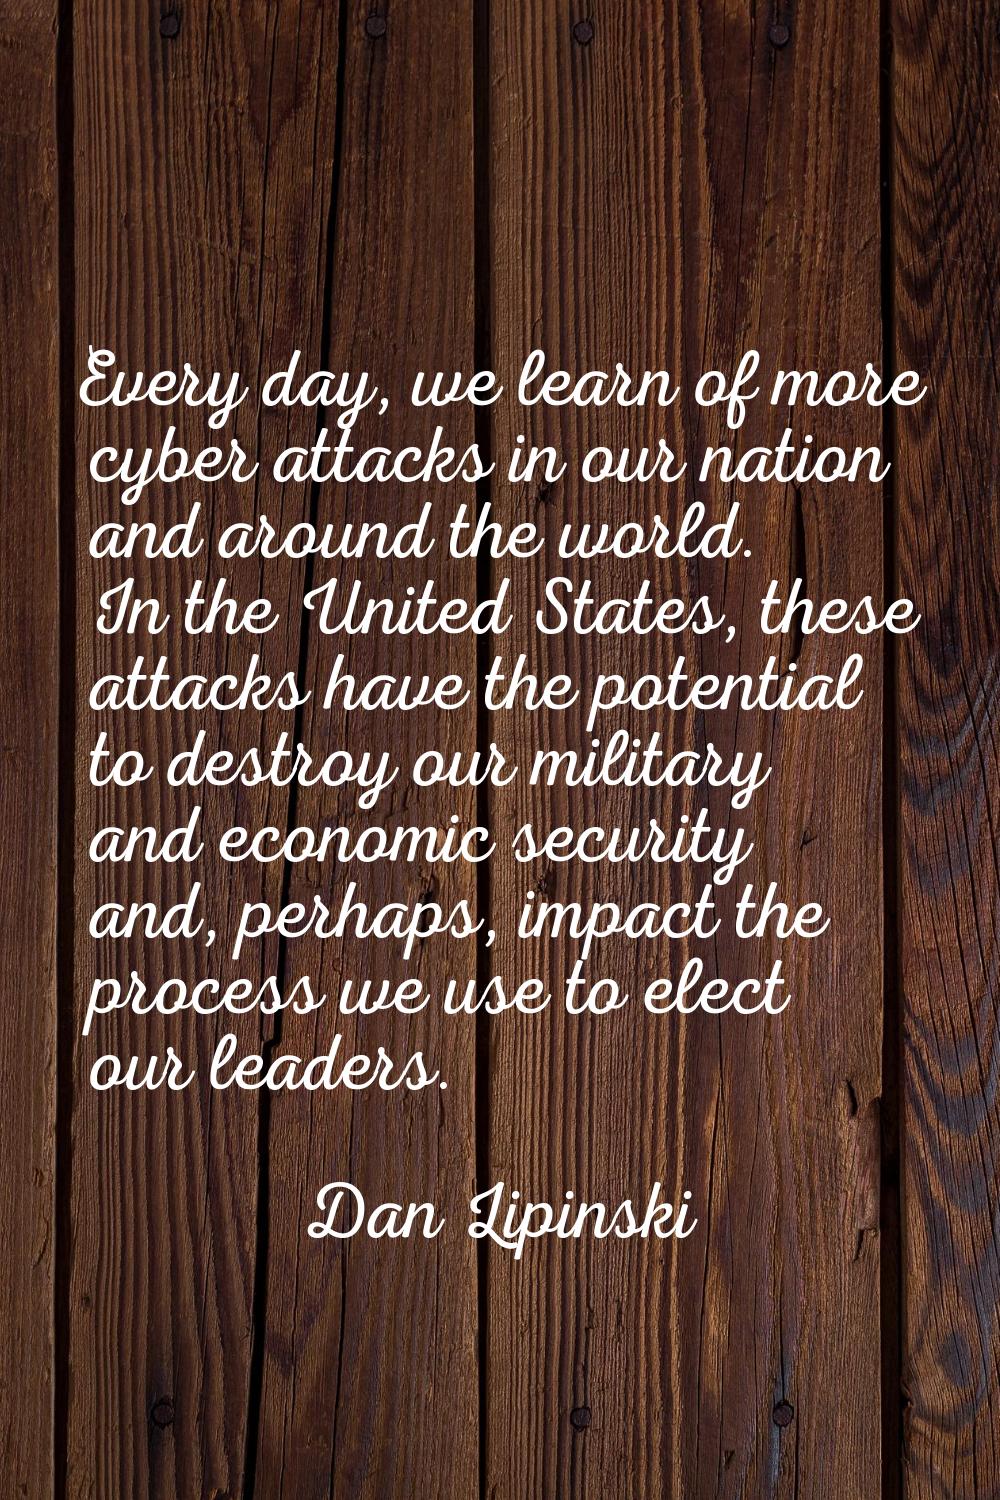 Every day, we learn of more cyber attacks in our nation and around the world. In the United States,